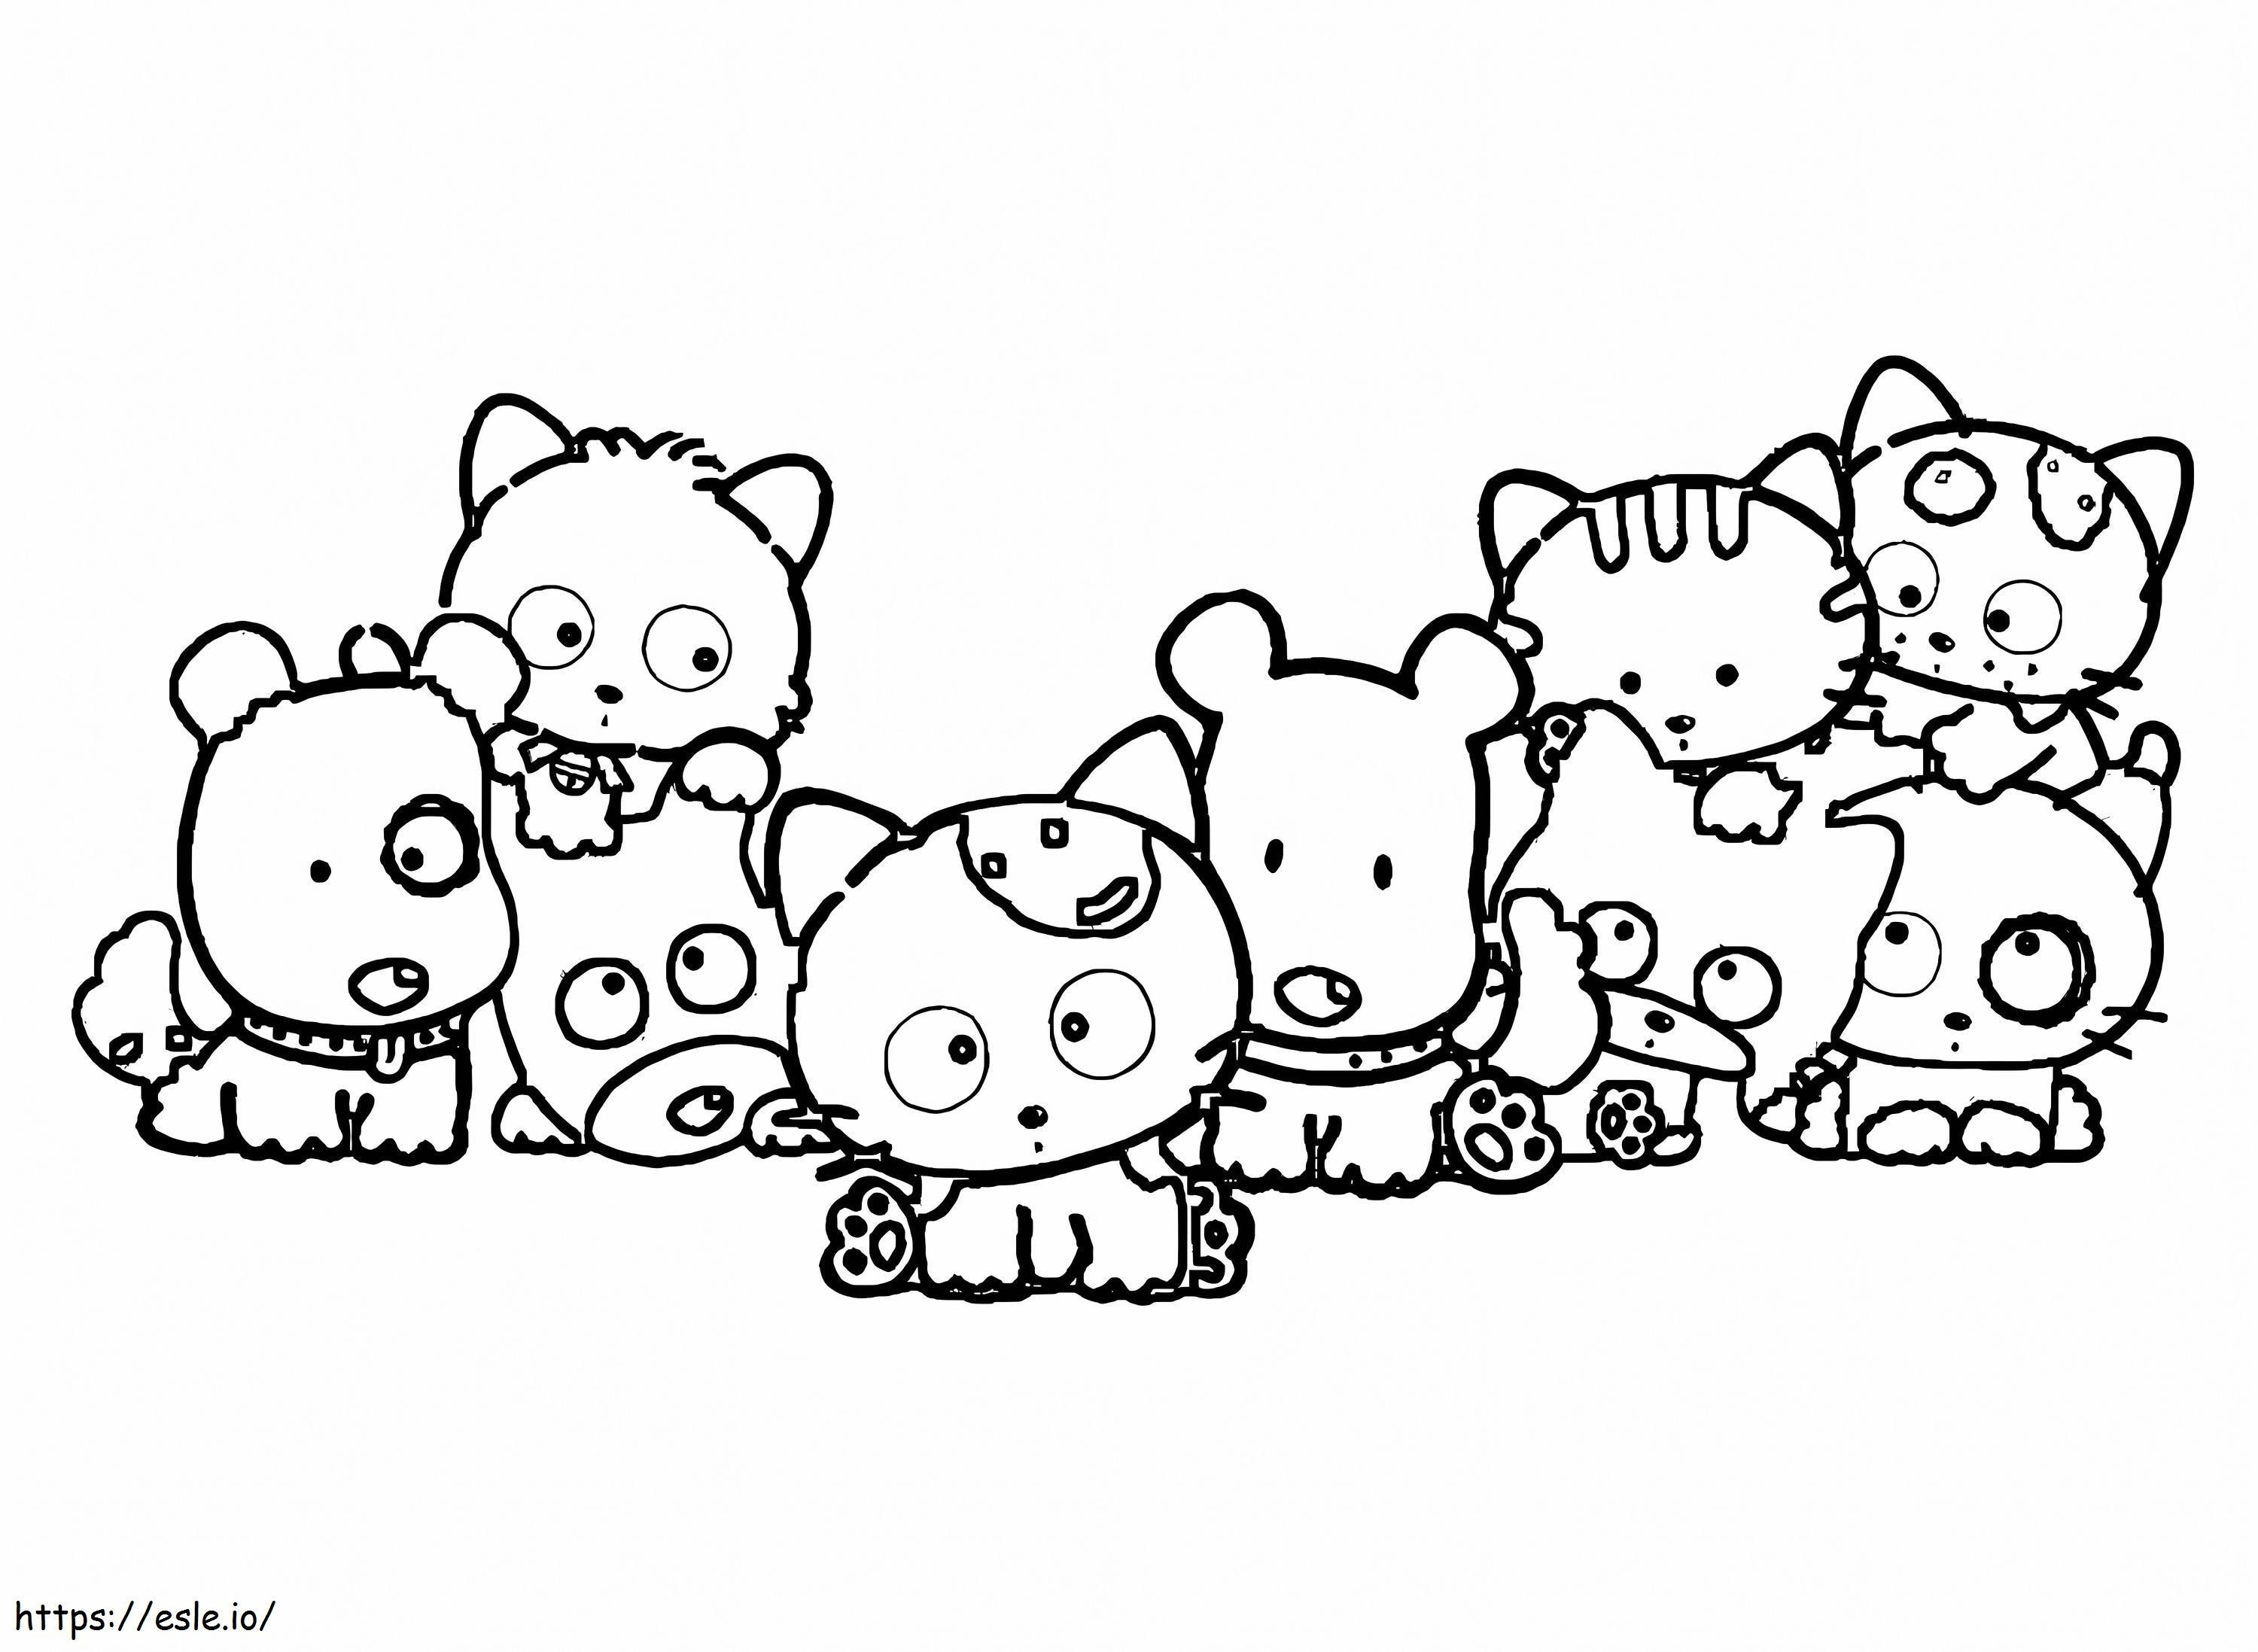 Adorable Tama And Friends coloring page